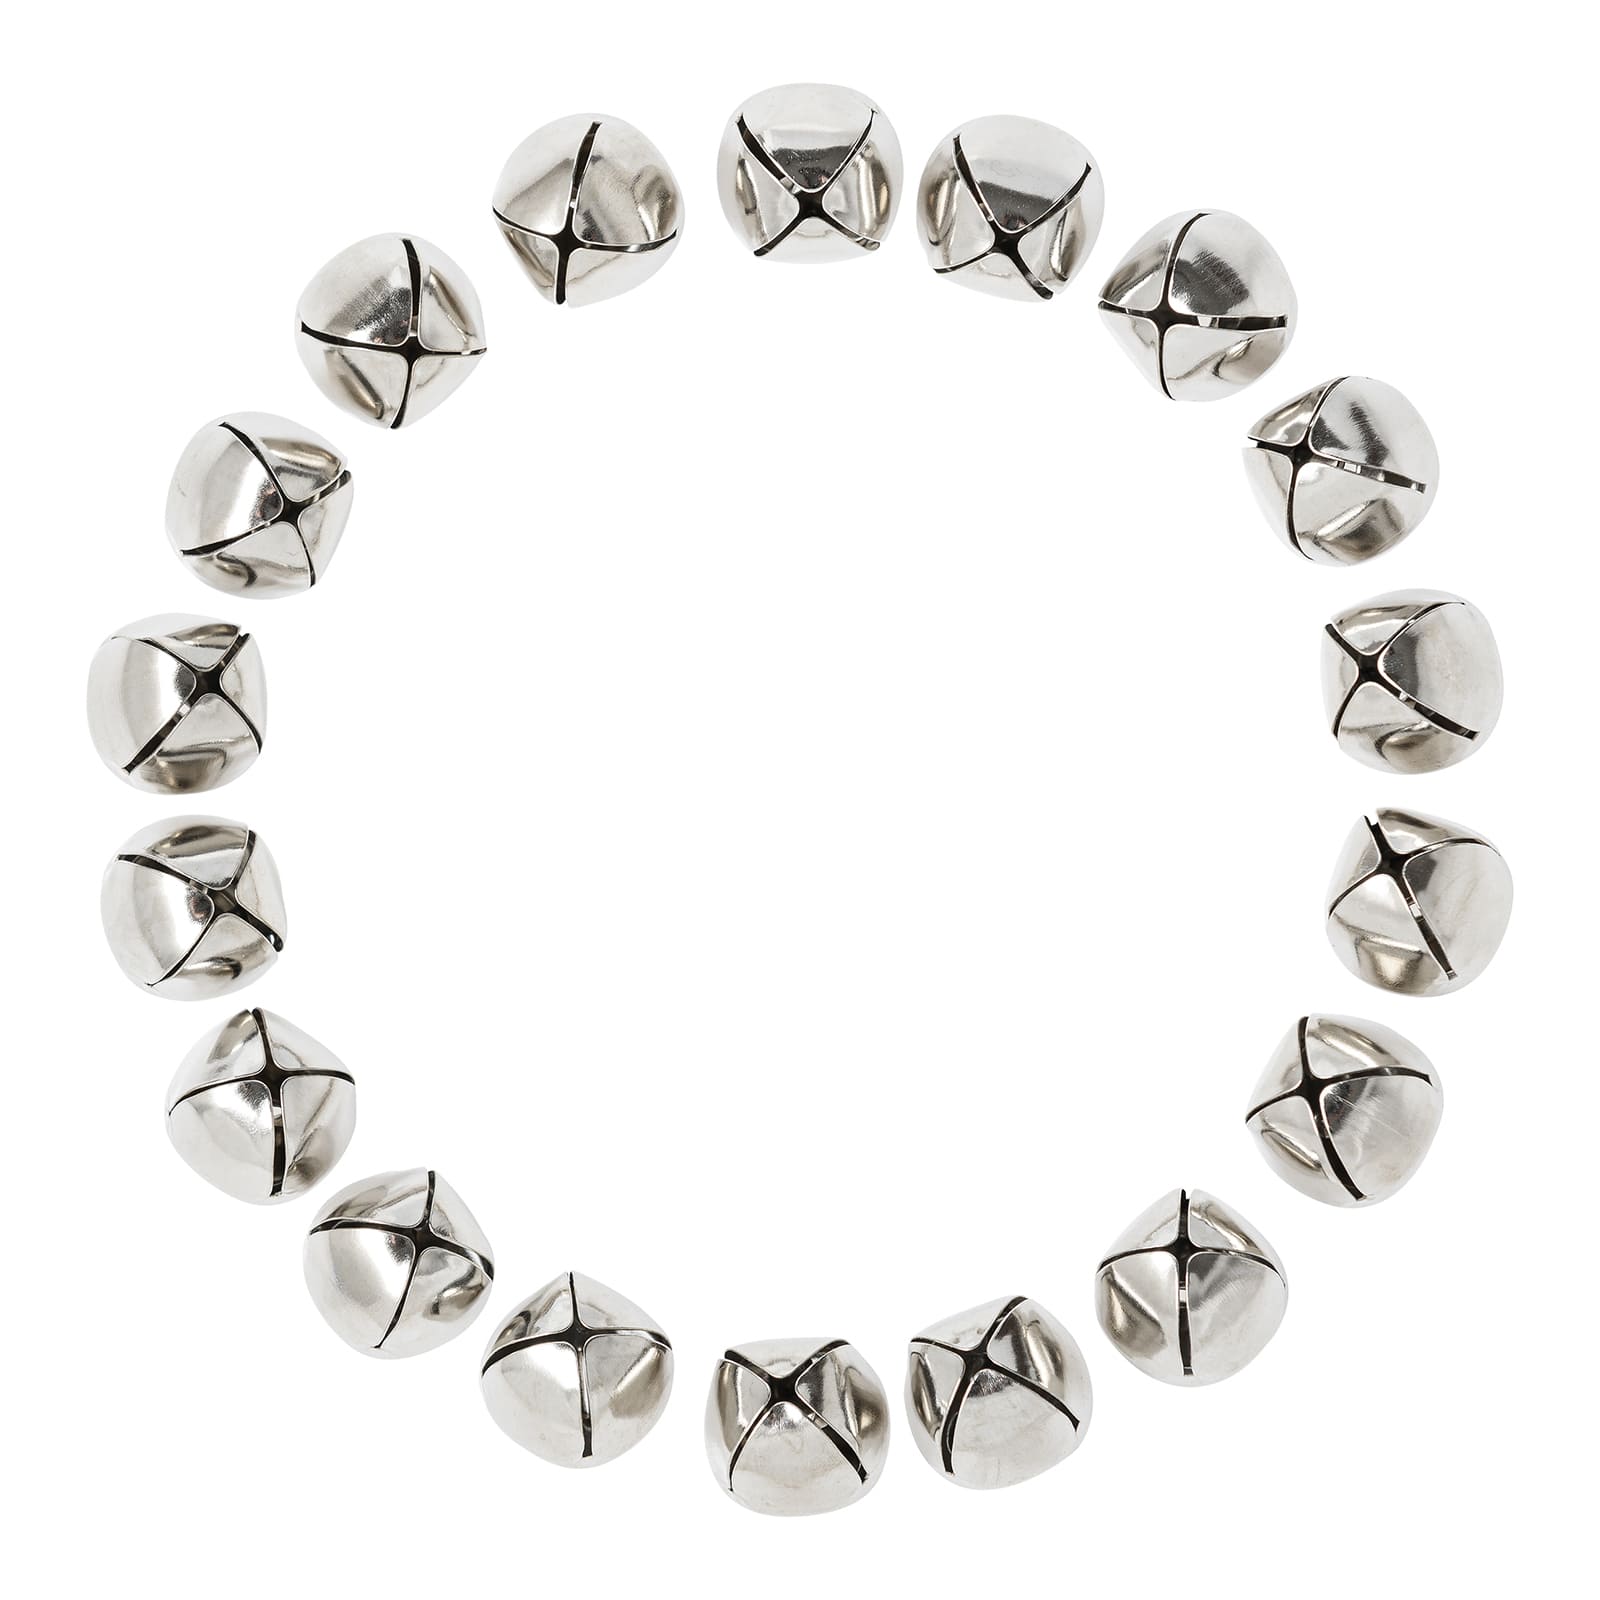 12 Packs: 38 ct. (456 total) 18mm Silver Jingle Bells by Creatology&#x2122;